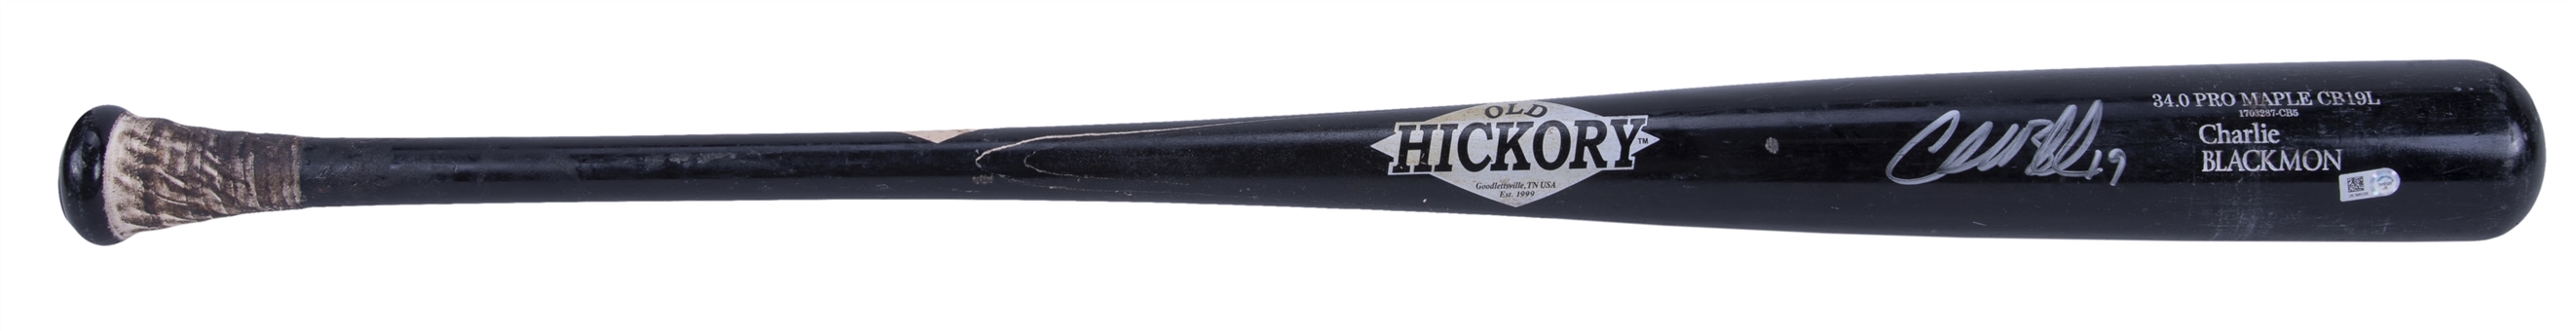 2017 Charlie Blackmon Game Used & Signed Old Hickory CB19L Model Bat (MLB Authenticated & Beckett)